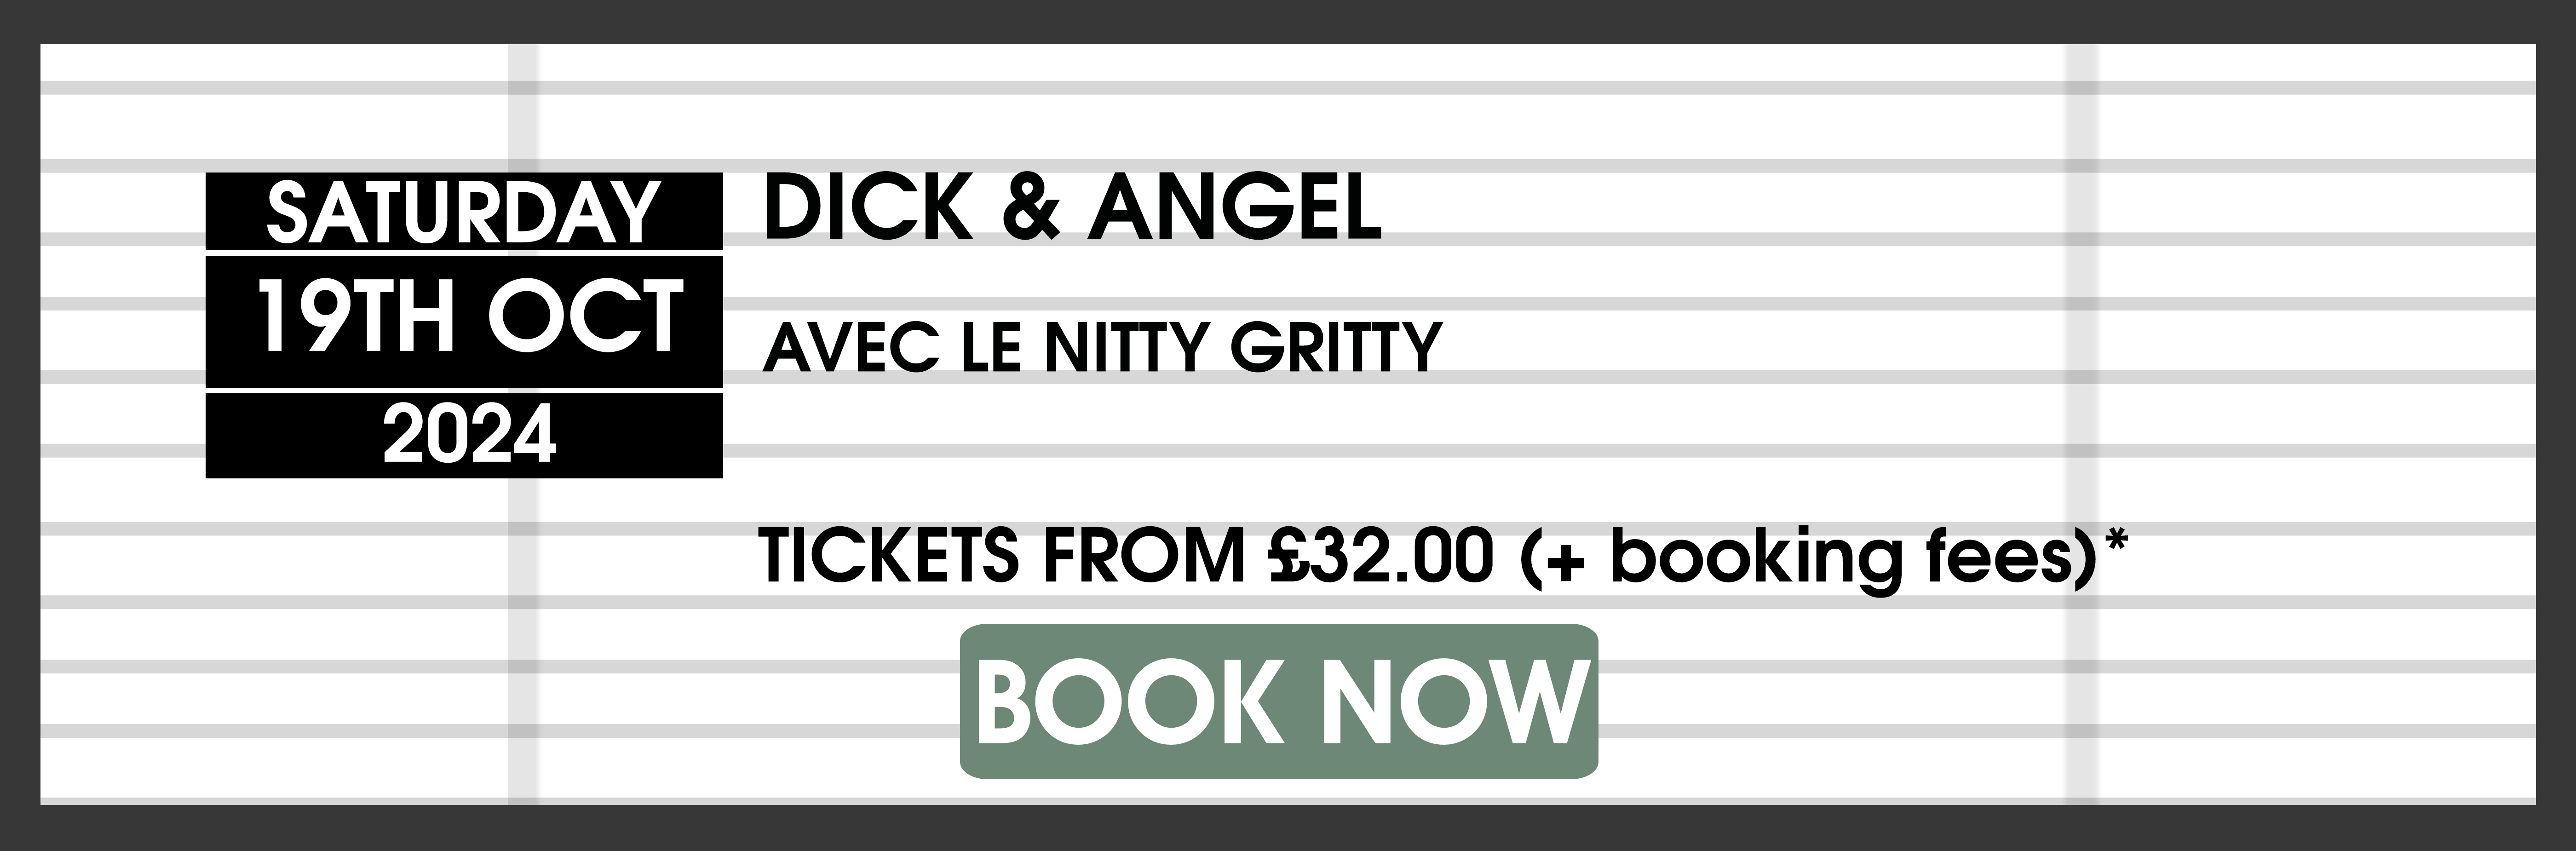 19.10.24 Dick & angel BOOK NOW